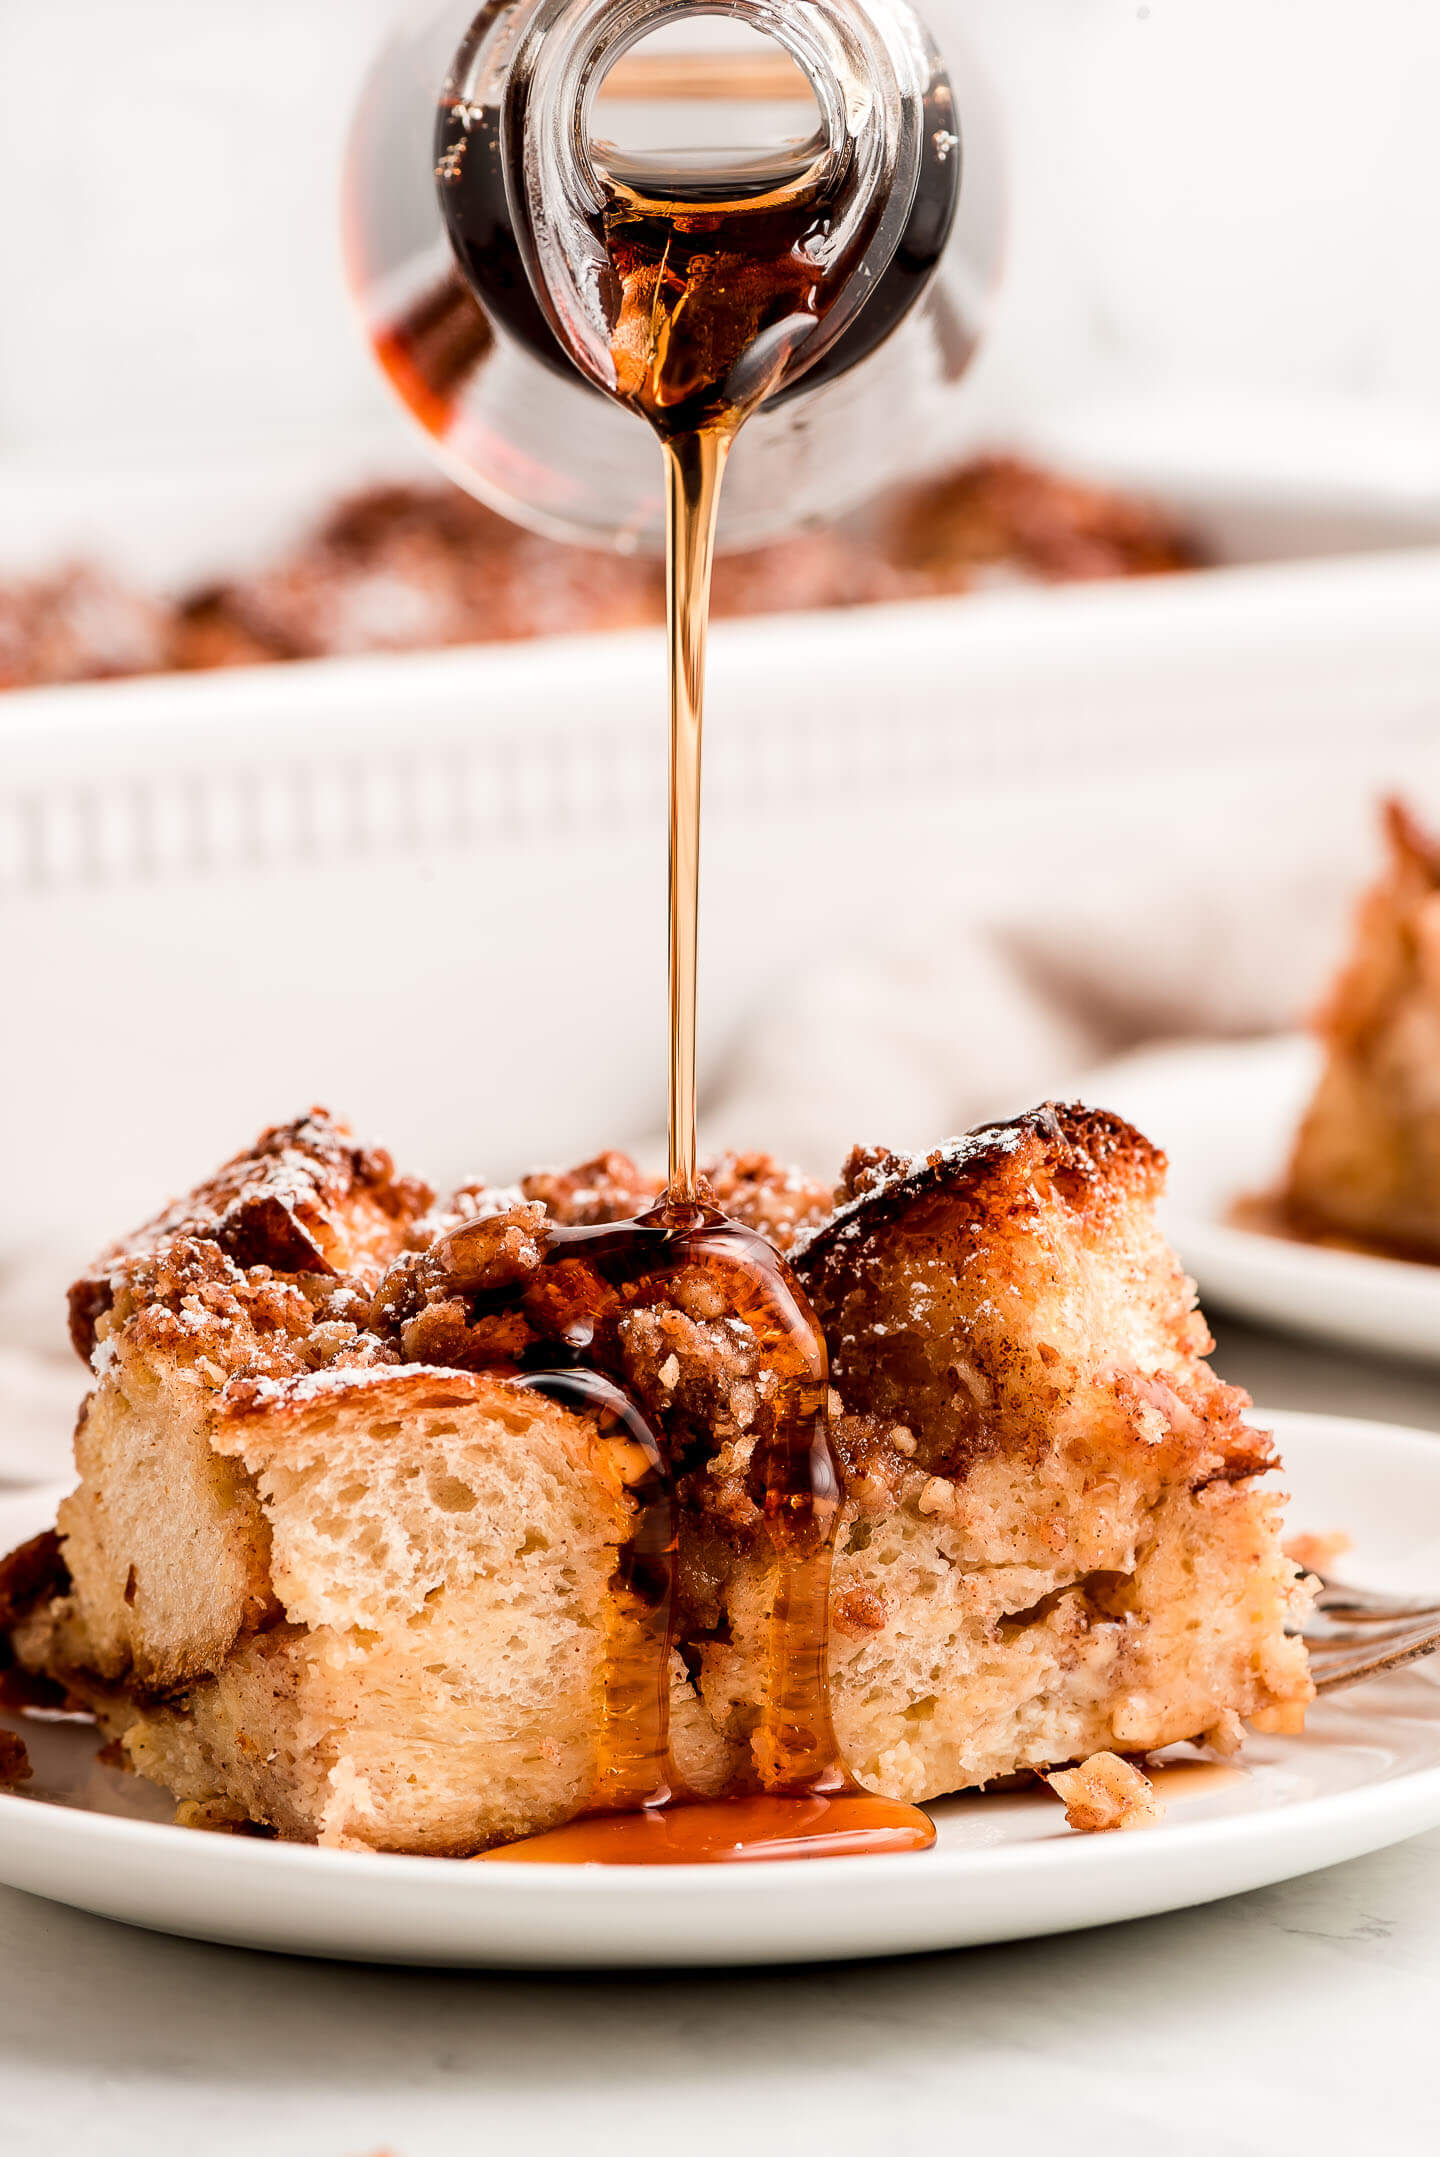 Maple syrup streaming down out of a bottle onto a slice of French Toast Casserole.